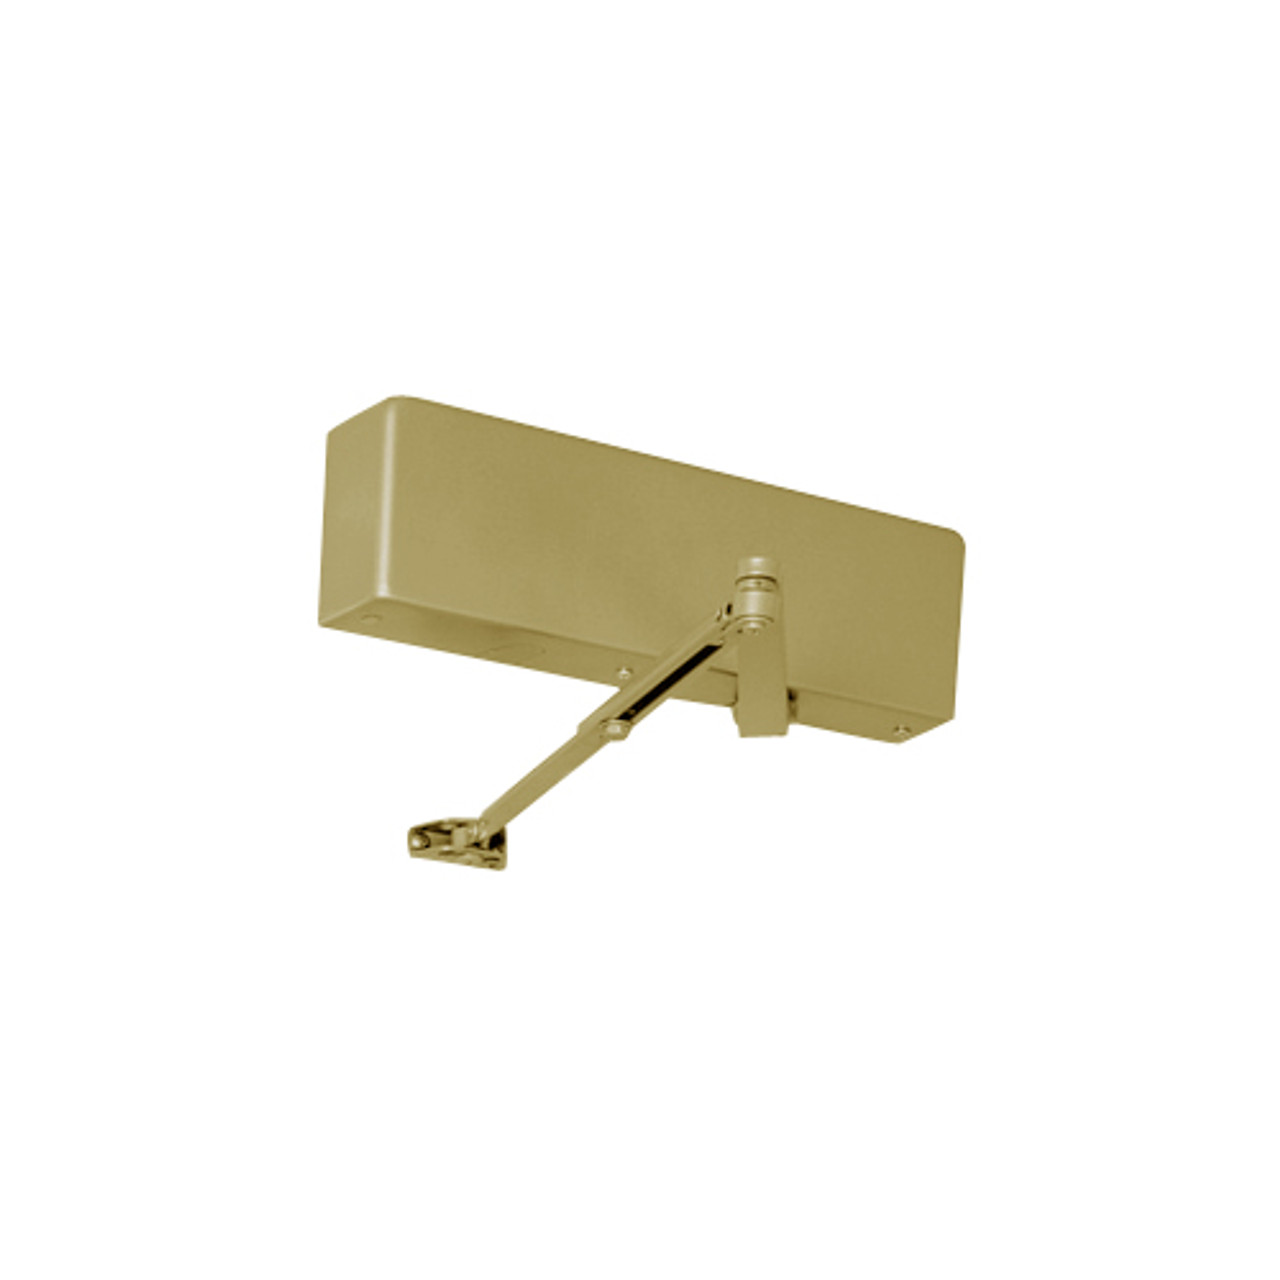 JL7500M-696 Norton 7500 Series Non-Hold Open Institutional Door Closer with Top Jamb Only Reveals 2-3/4 to 7 inch to 180 Degree in Gold Finish